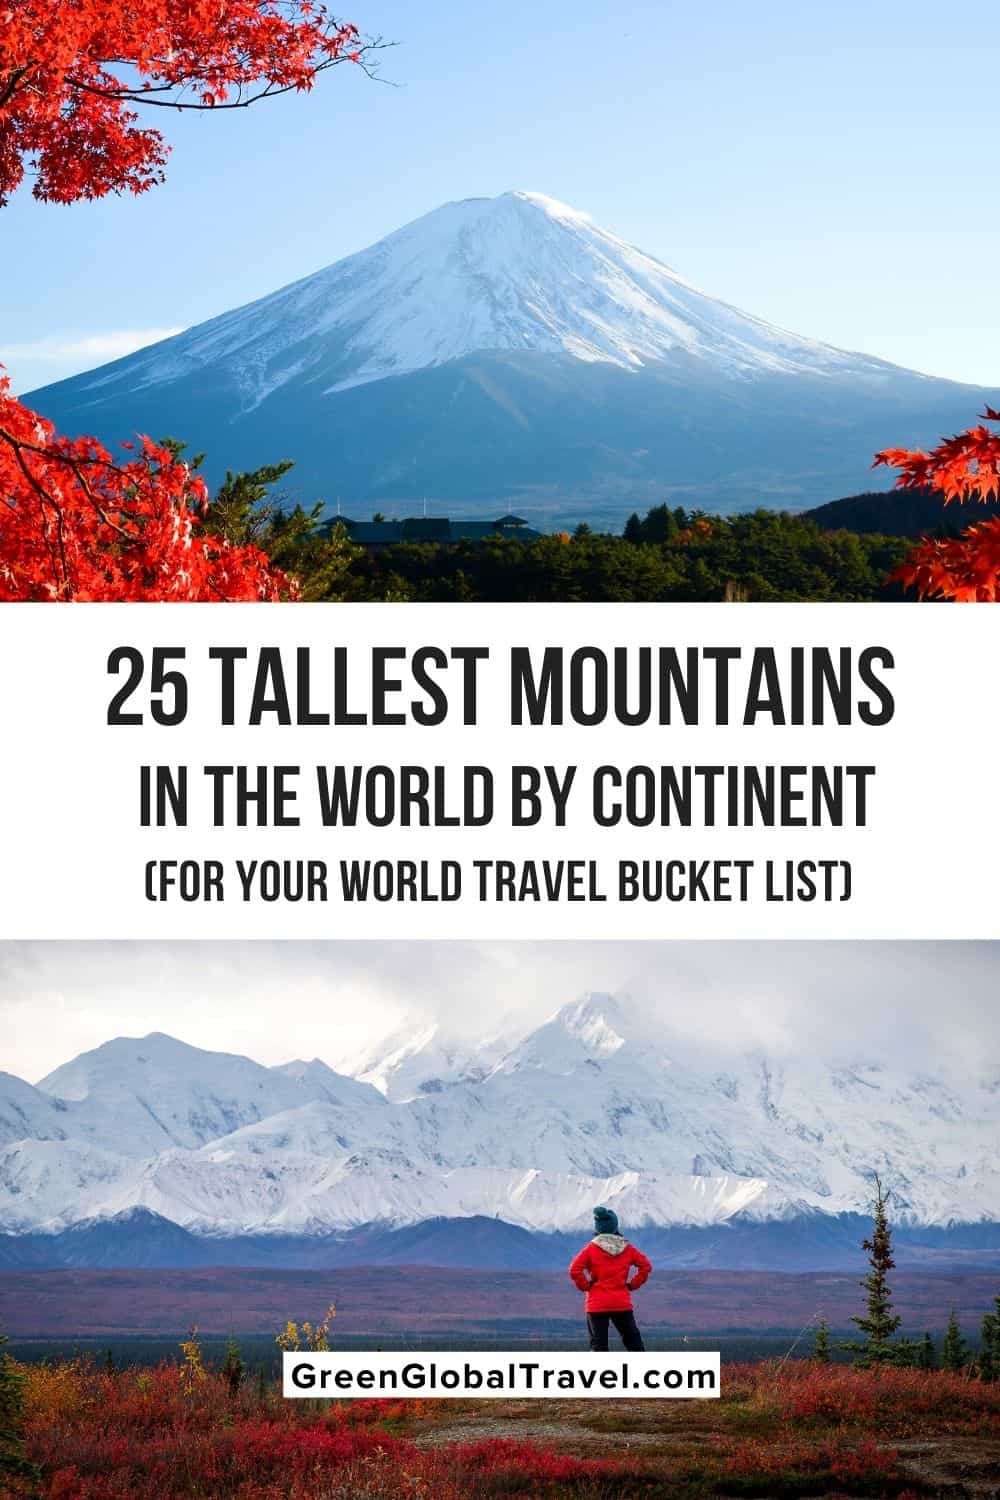 An overview of the 25 Tallest Mountains in the World, broken down by continent, including the famed Seven Summits and many of the Volcanic Seven Summits for your World Travel Bucket List.